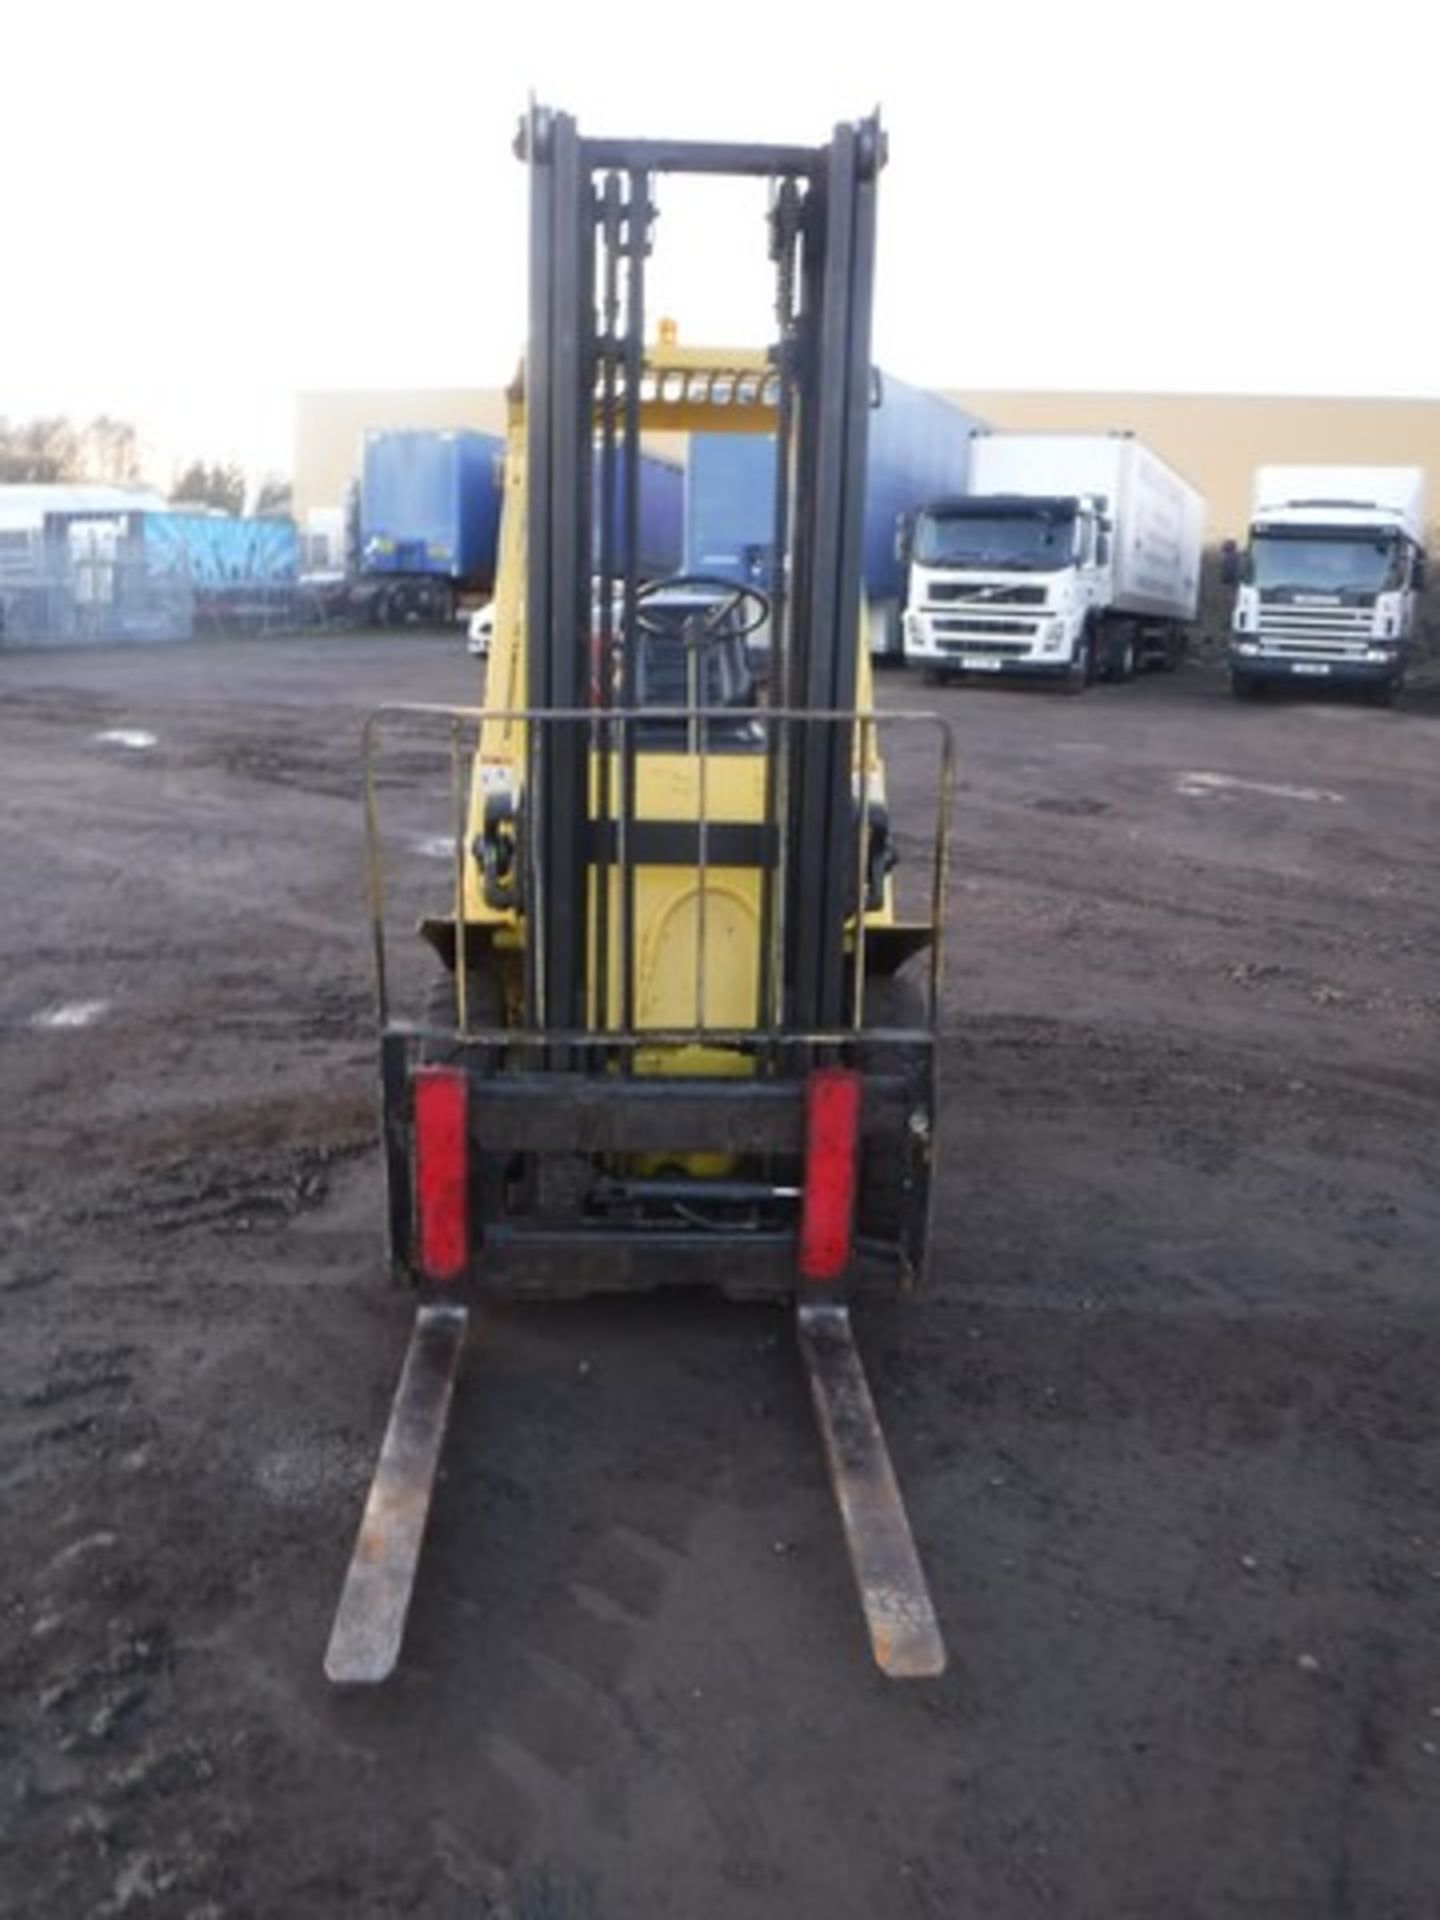 1989 HYSTER H2.50XL 2.5 tone gas forklift c/w side shift. S/NA177B36136K 650hrs (not verified) - Image 3 of 11